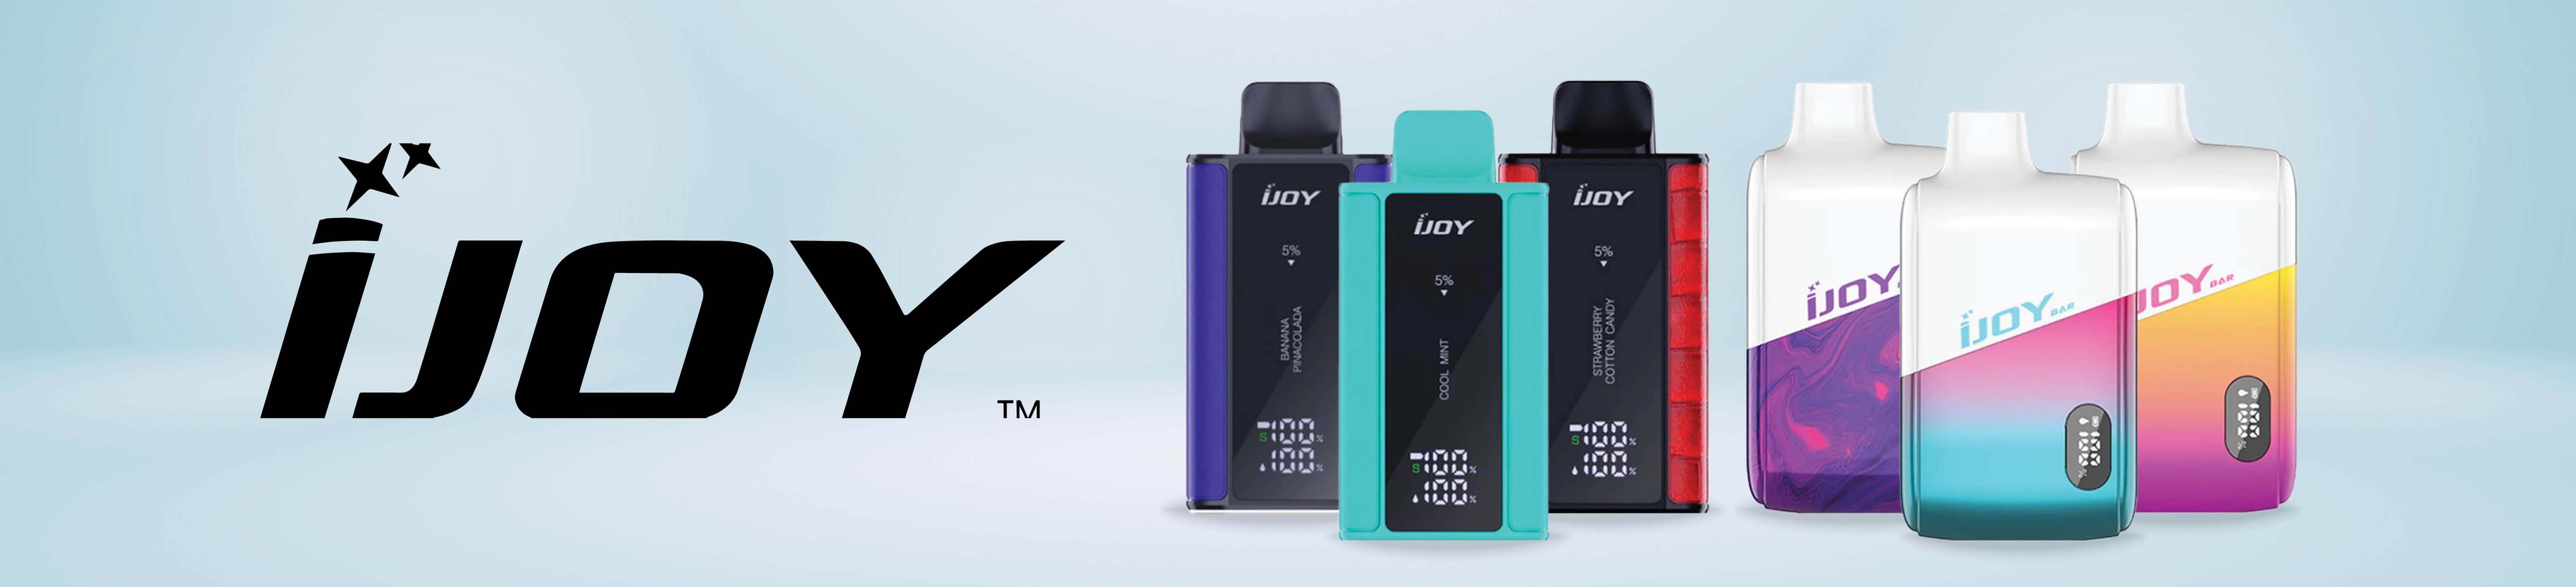 iJoy Smart Vapes Collection Banner